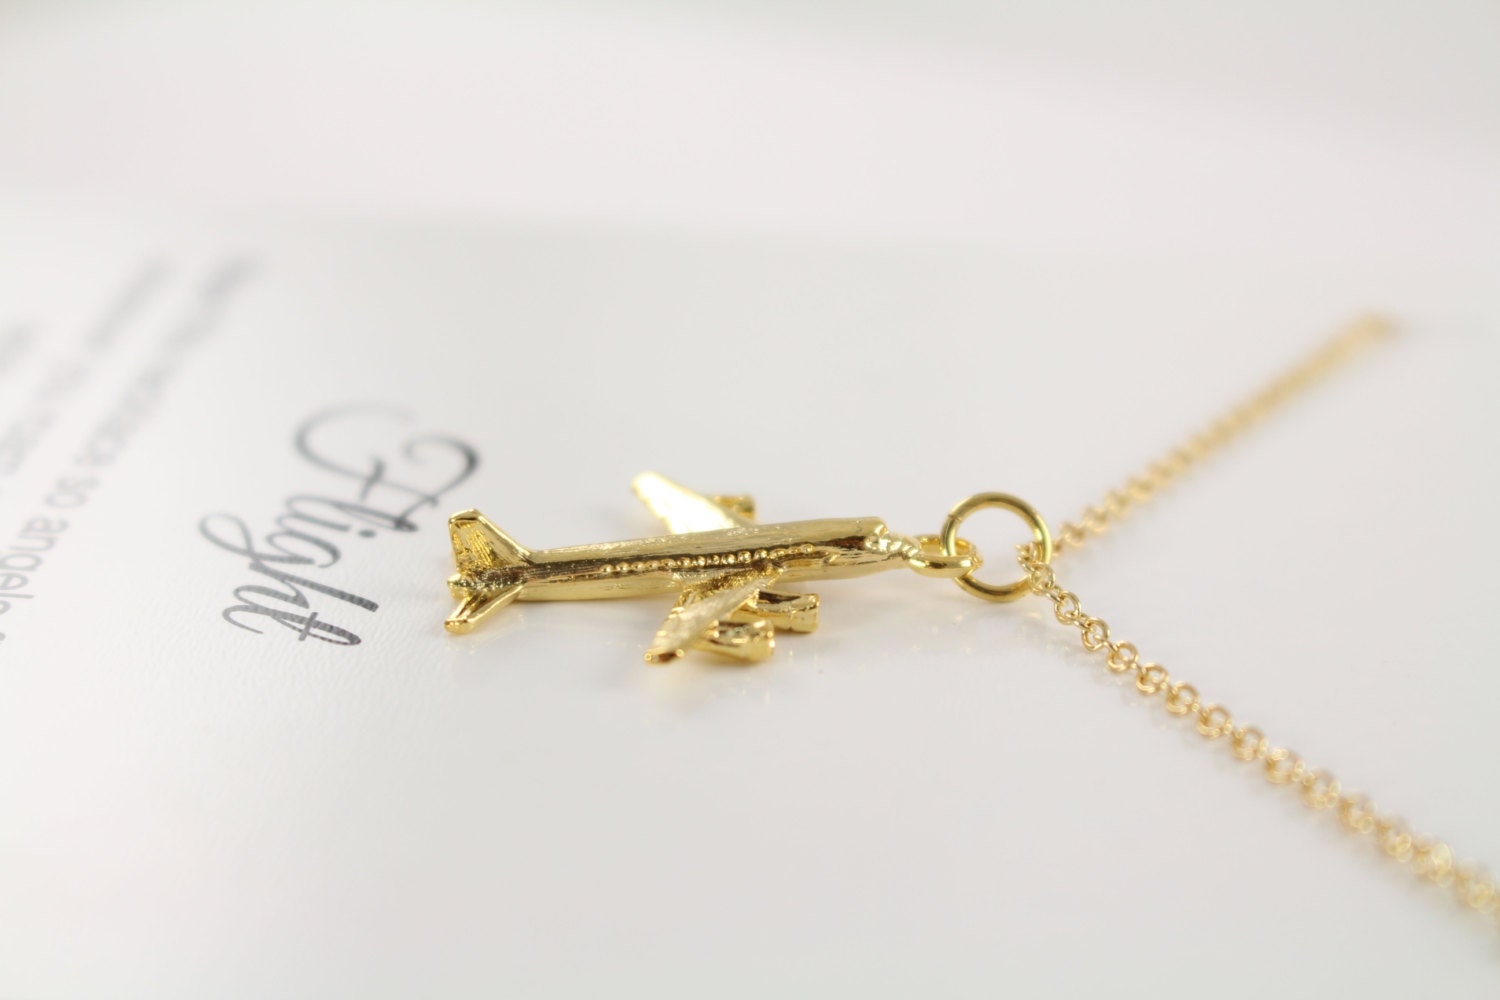 Airplane Necklace Gold Jewelry for Pilot Flight Attendant 